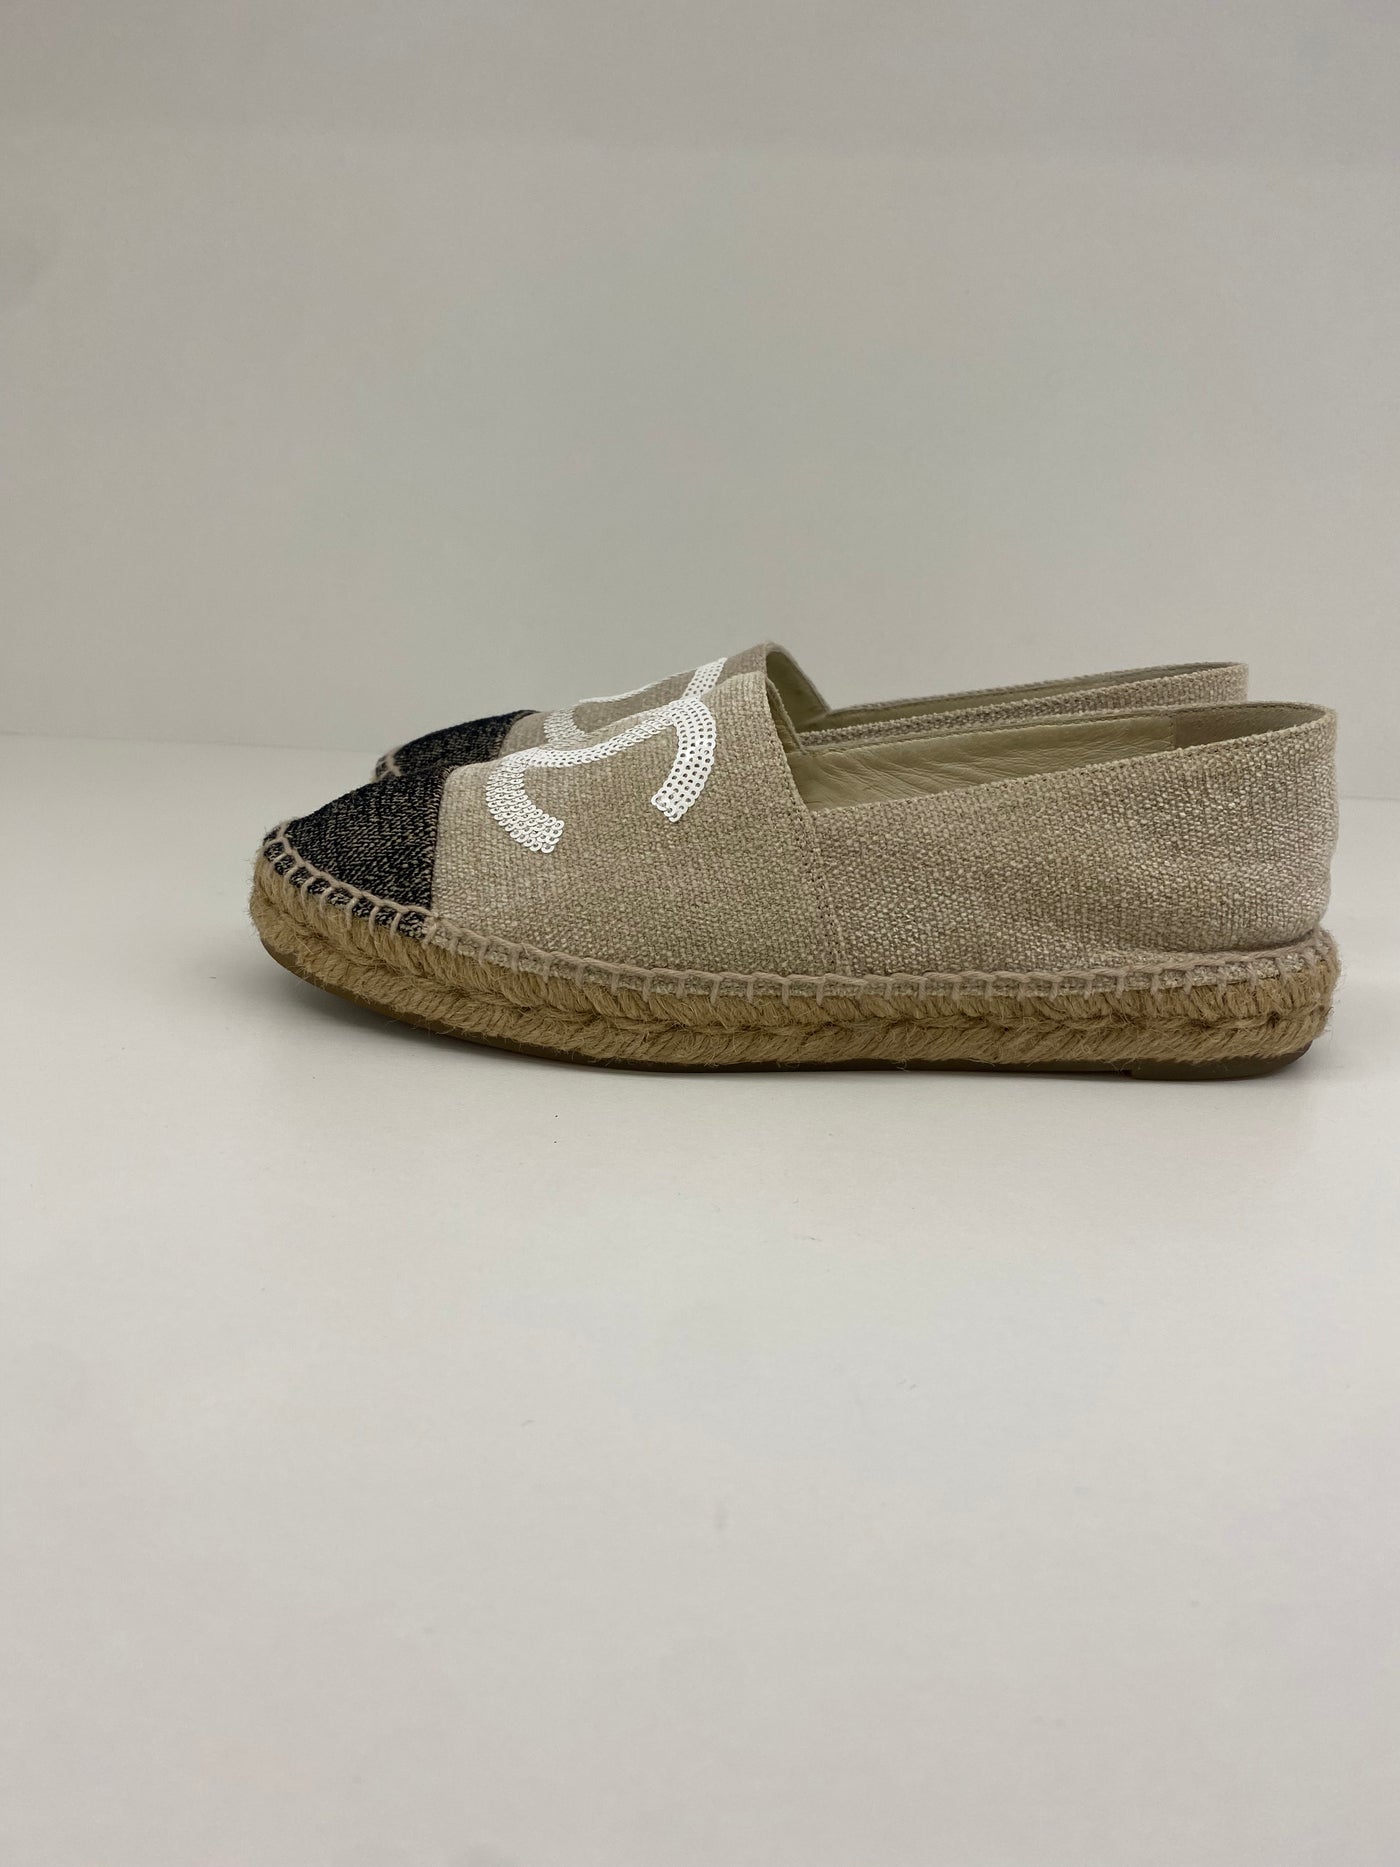 Chanel Fabric Espadrilles with Sequin CC - Size 37 (OE)